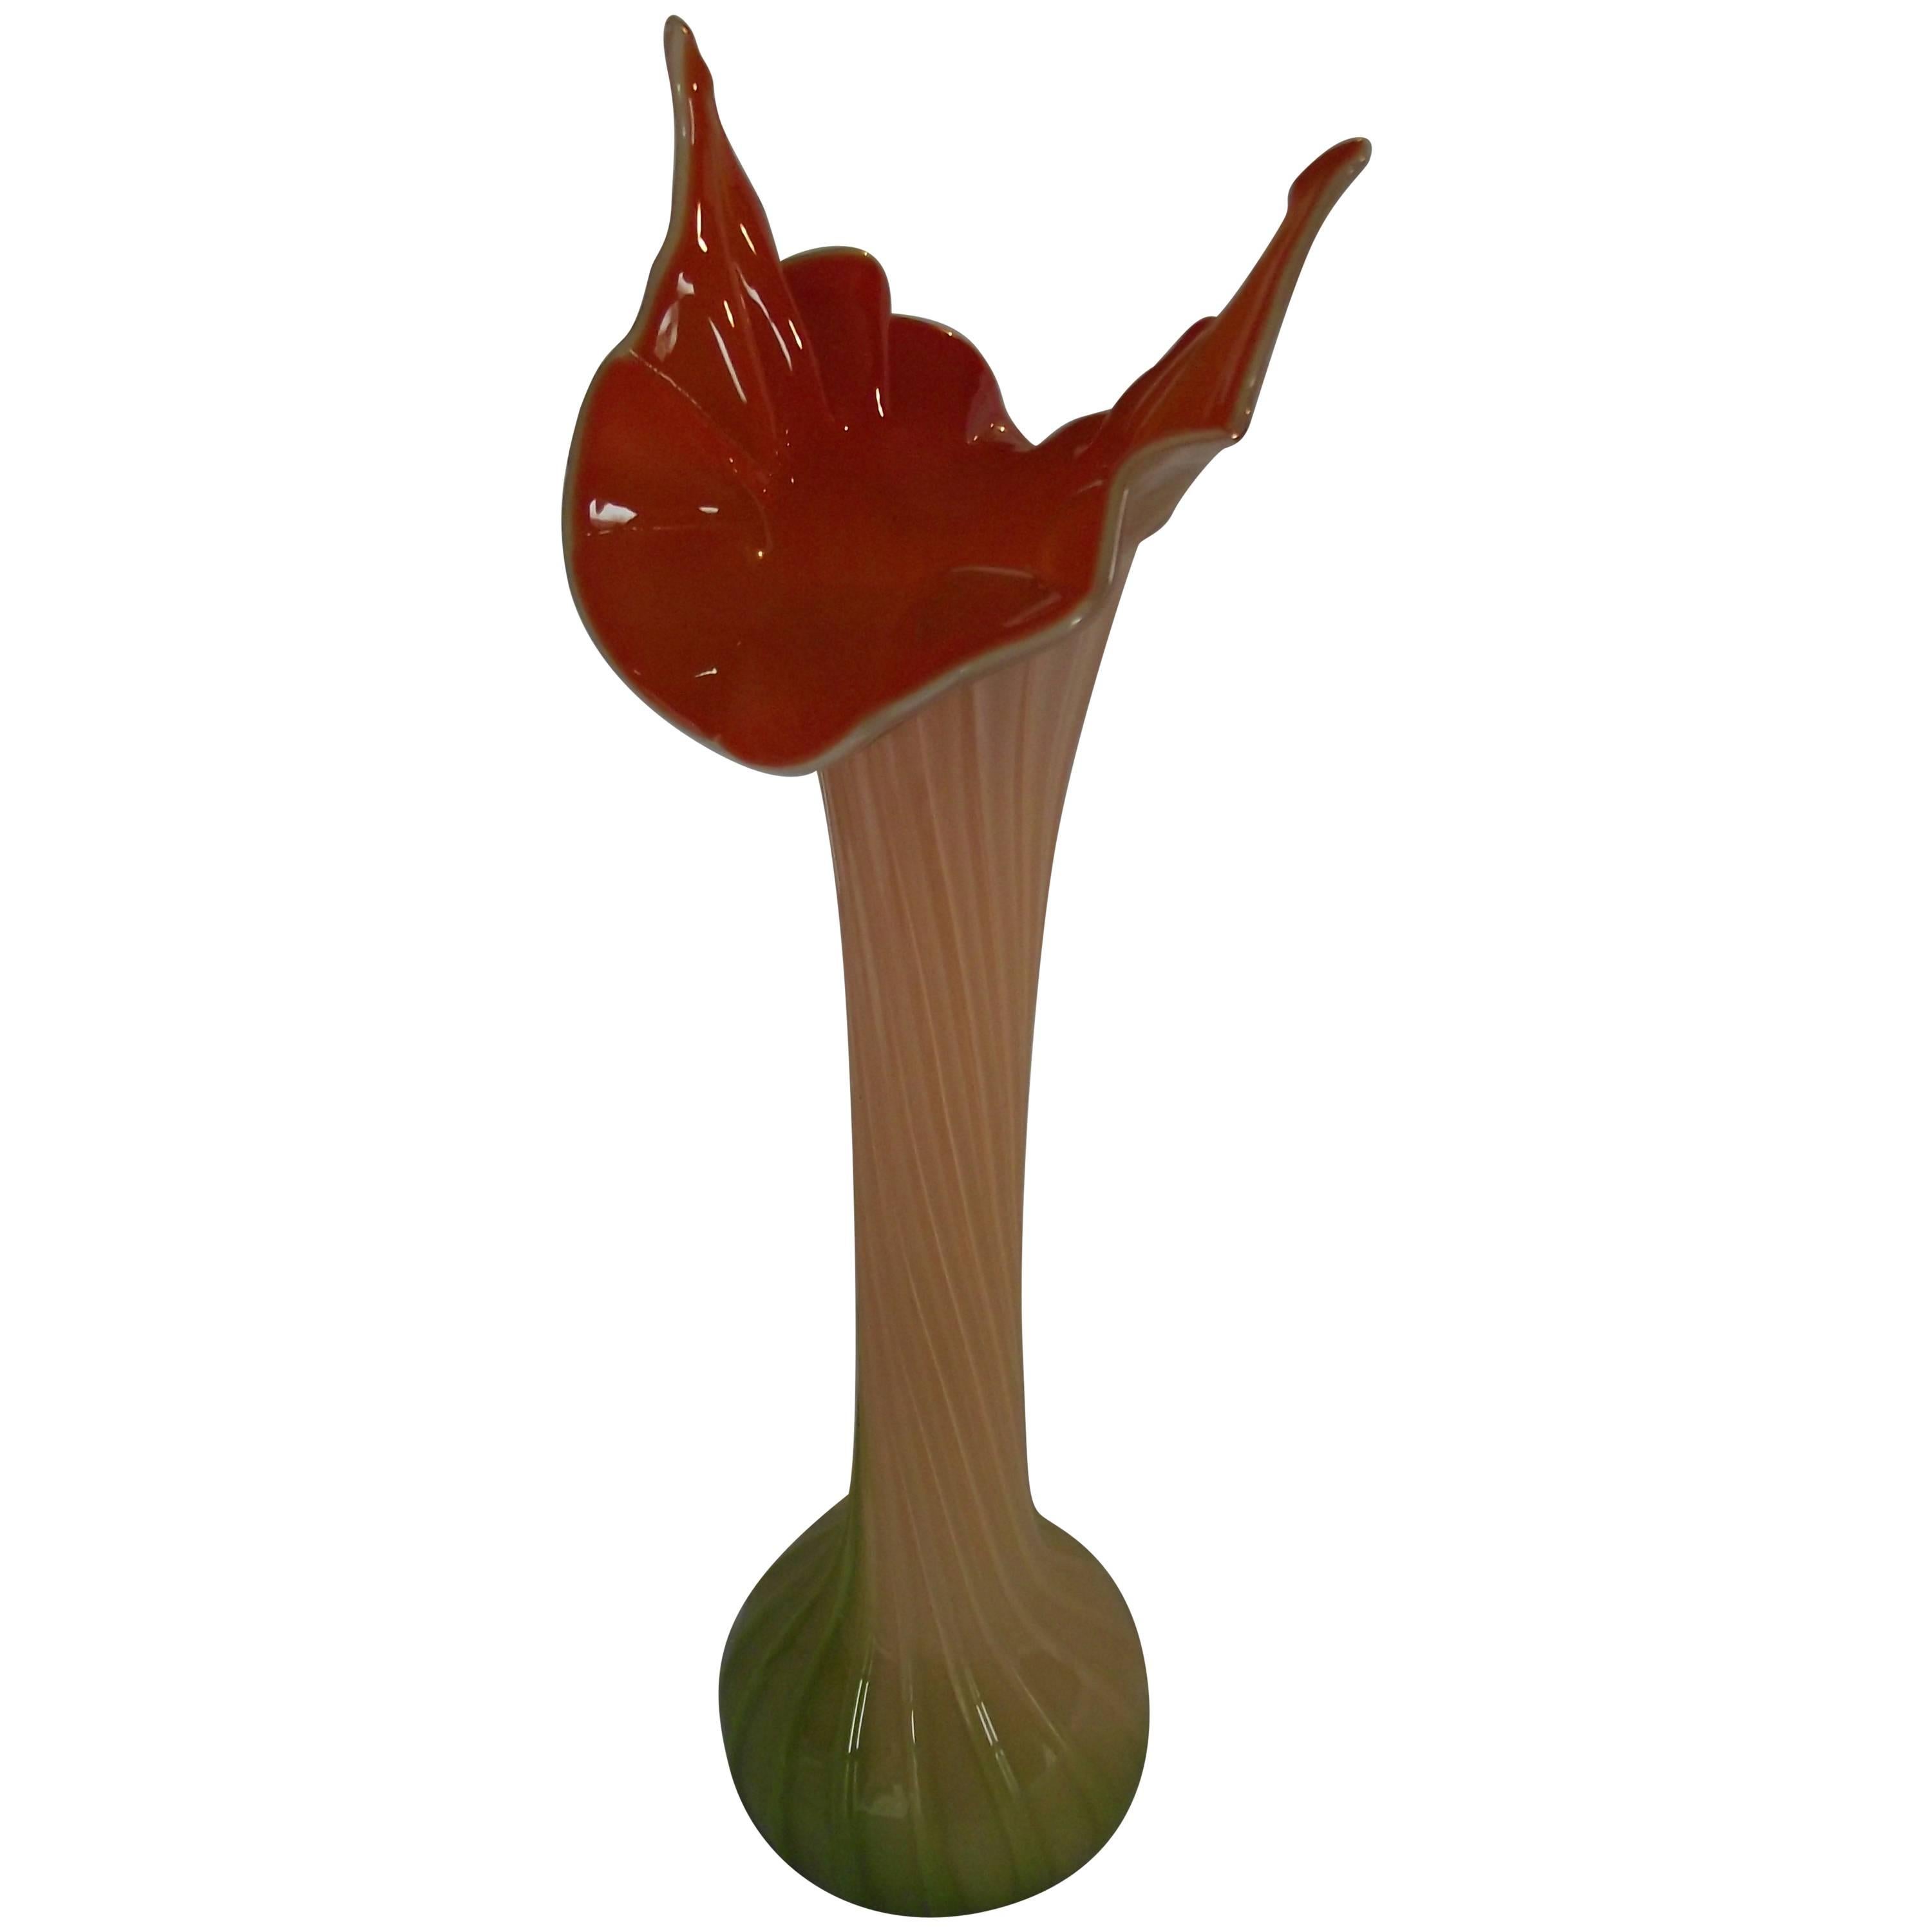 Vintage Murano Glass Vase, Murano Glass "Jack in the Pulpit" Vase For Sale